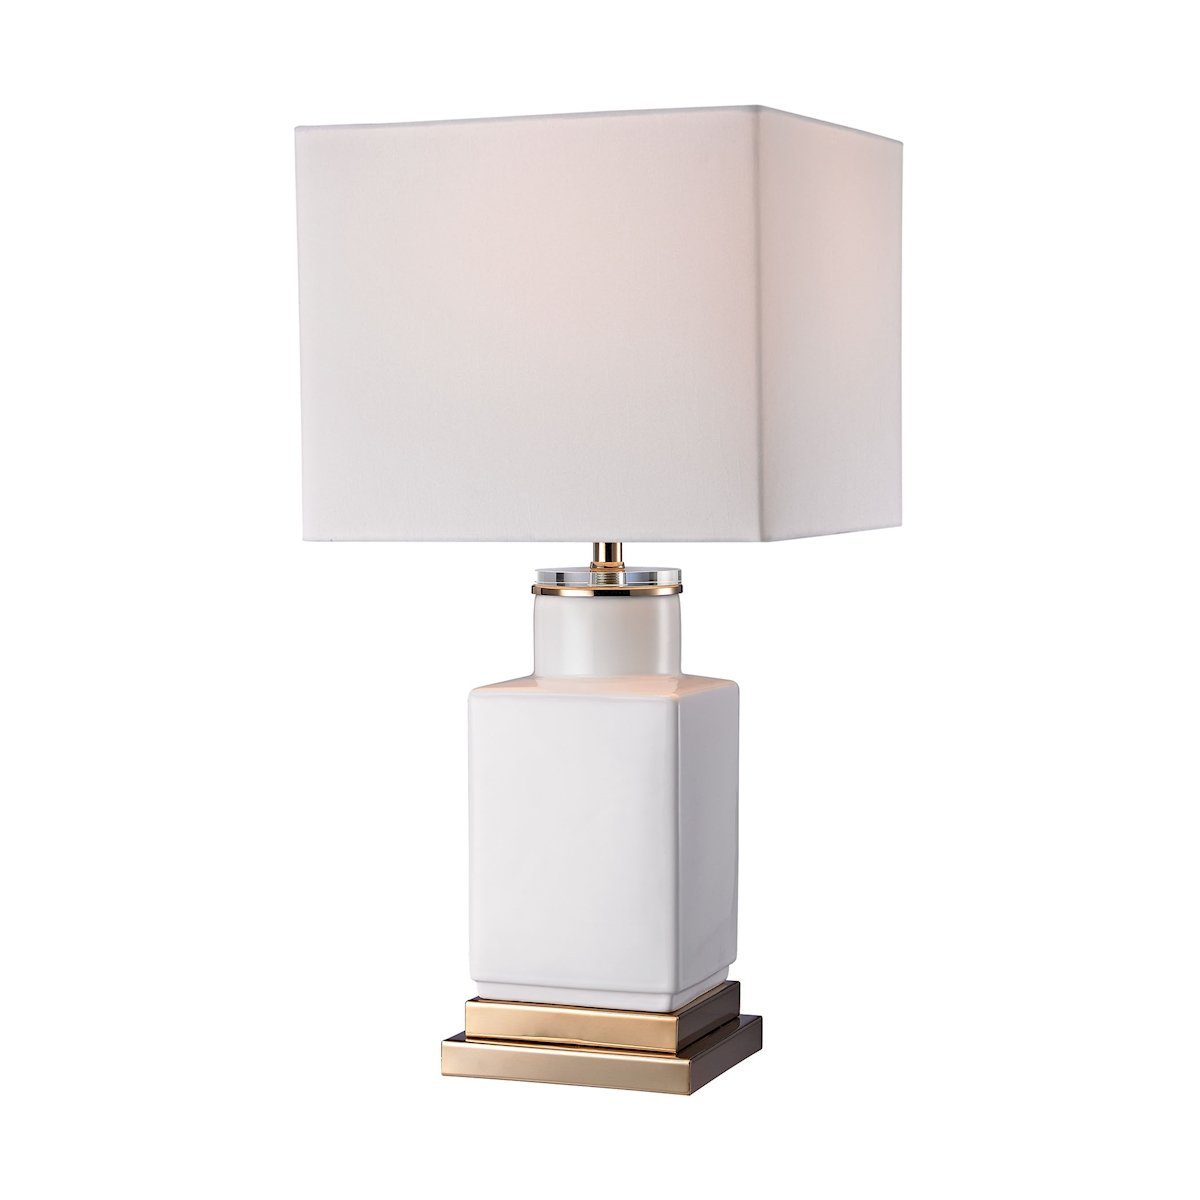 Small White Cube Lamp Lamps Dimond Lighting 